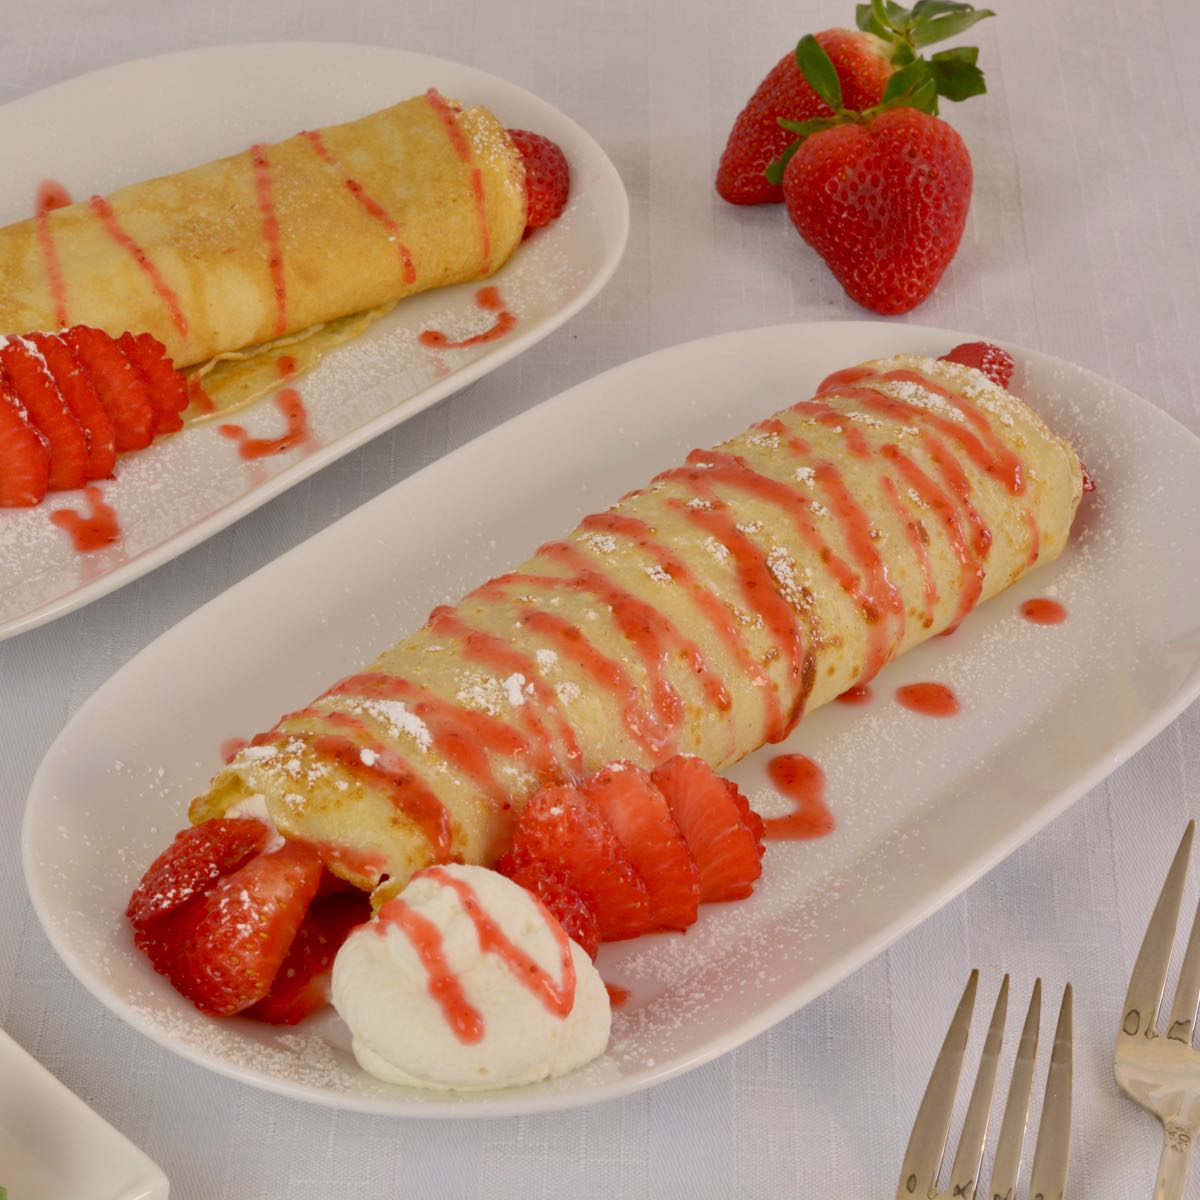 Two plates each with a Whipped Cream Filled Crepe drizzled with Strawberry Kirsch Sauce and fresh strawberries.